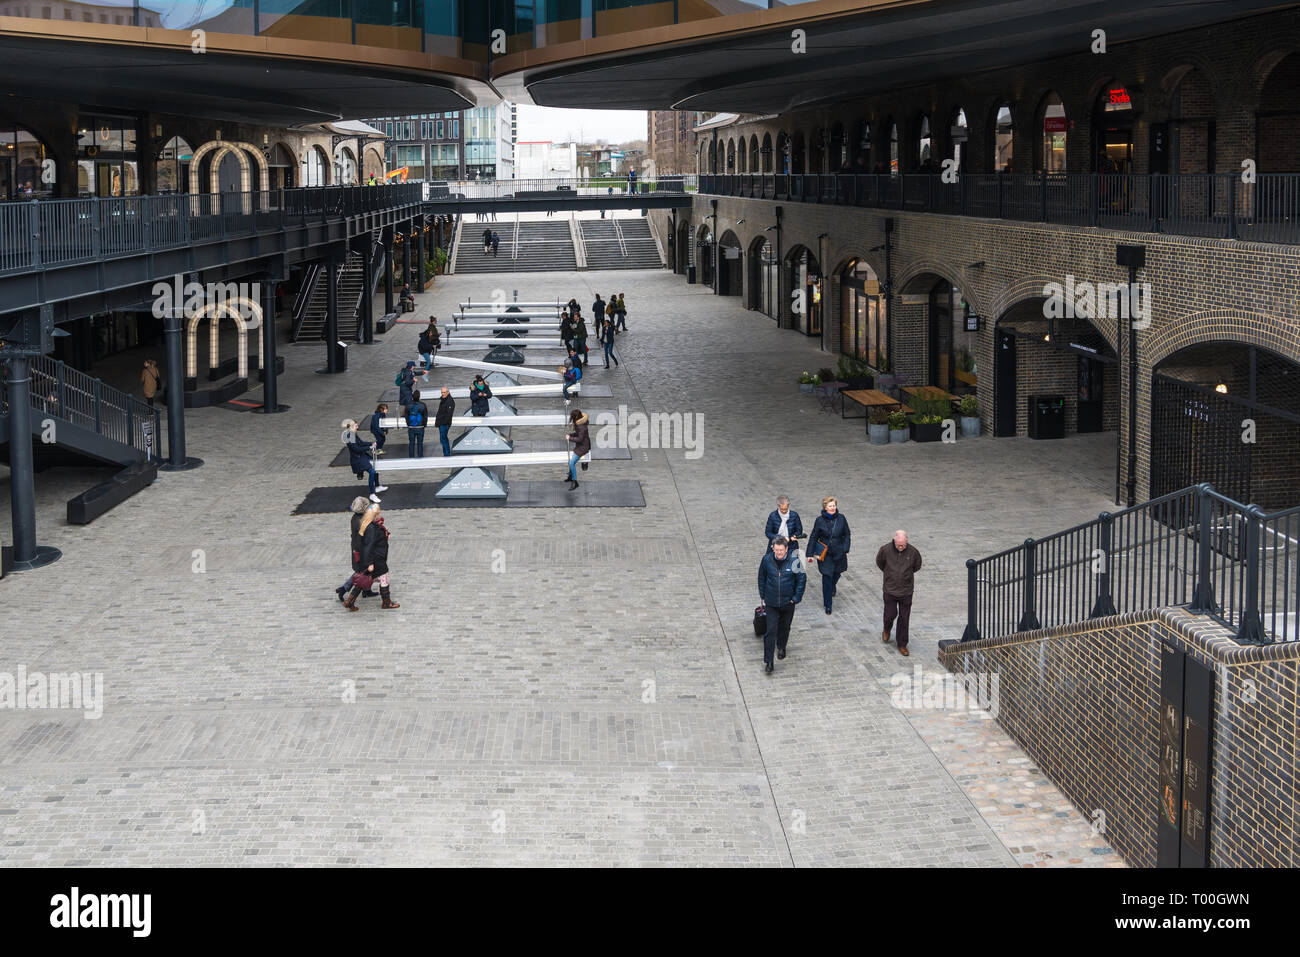 People at Coal Drops Yard, a refurbished area of Victorian buildings converted into shops, restaurants and leisure facilities, Kings Cross, London Stock Photo